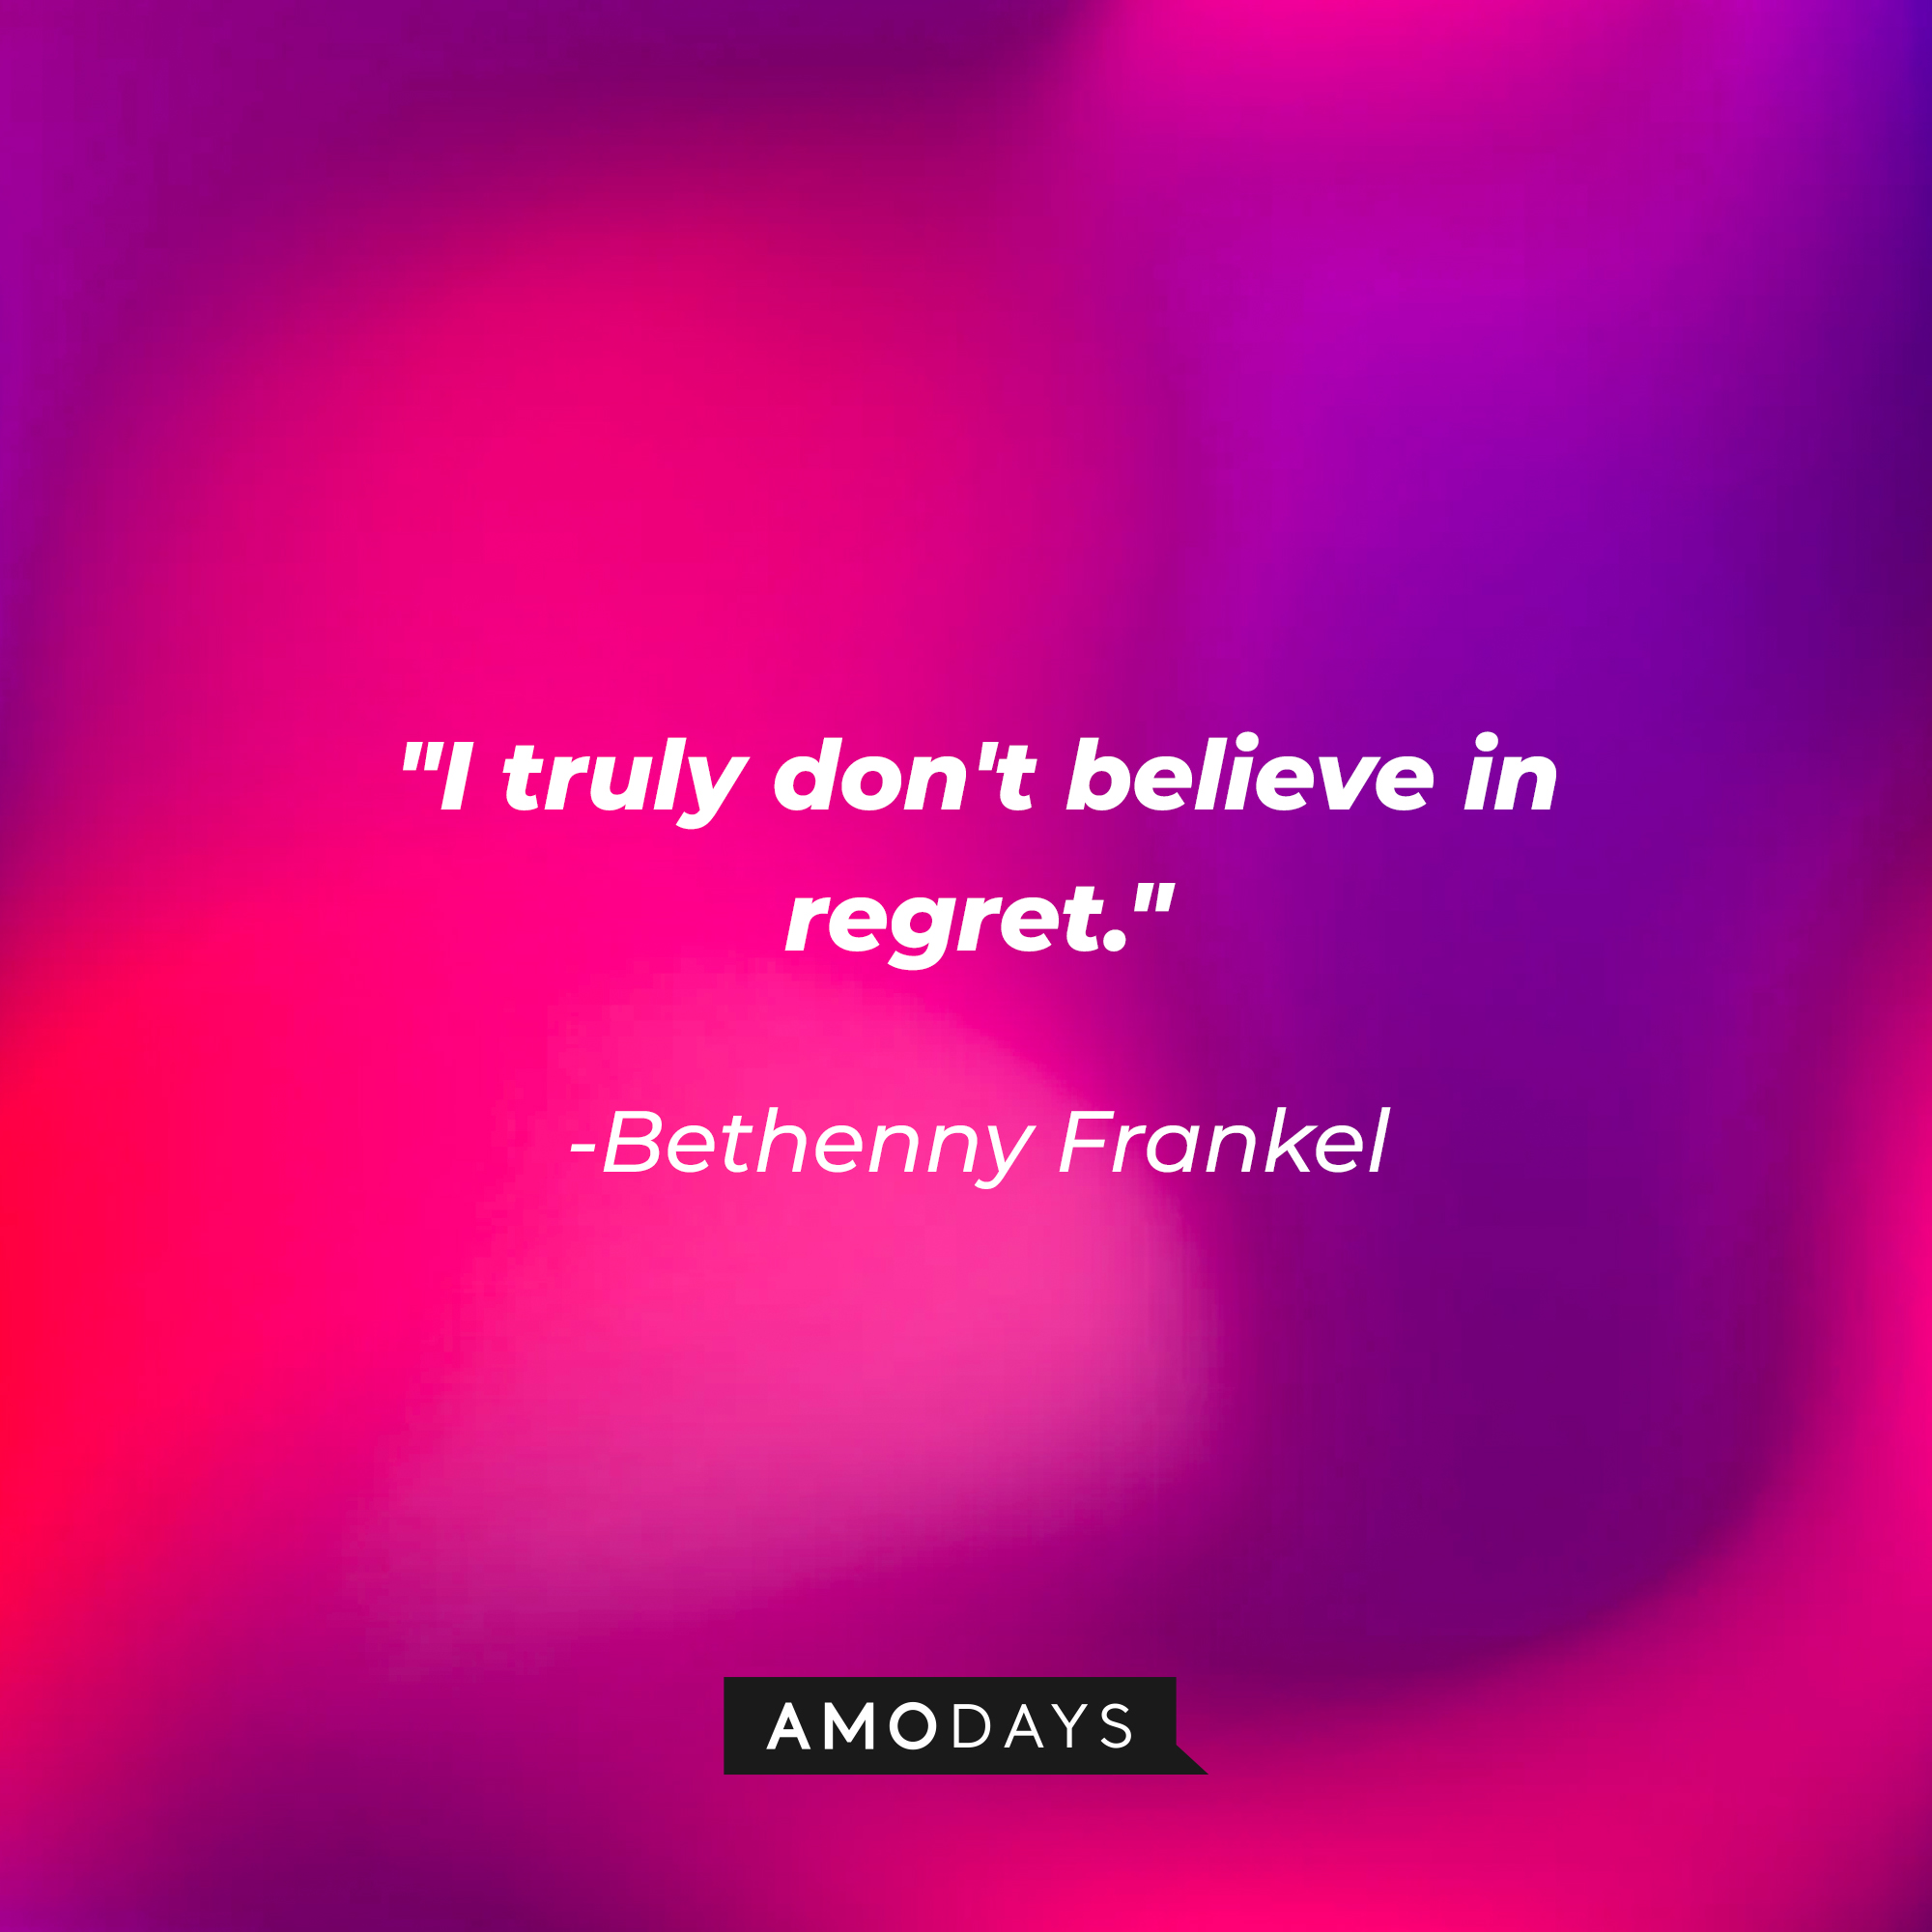 Bethenny Frankel's quote: "I truly don't believe in regret." | Source: Amodays